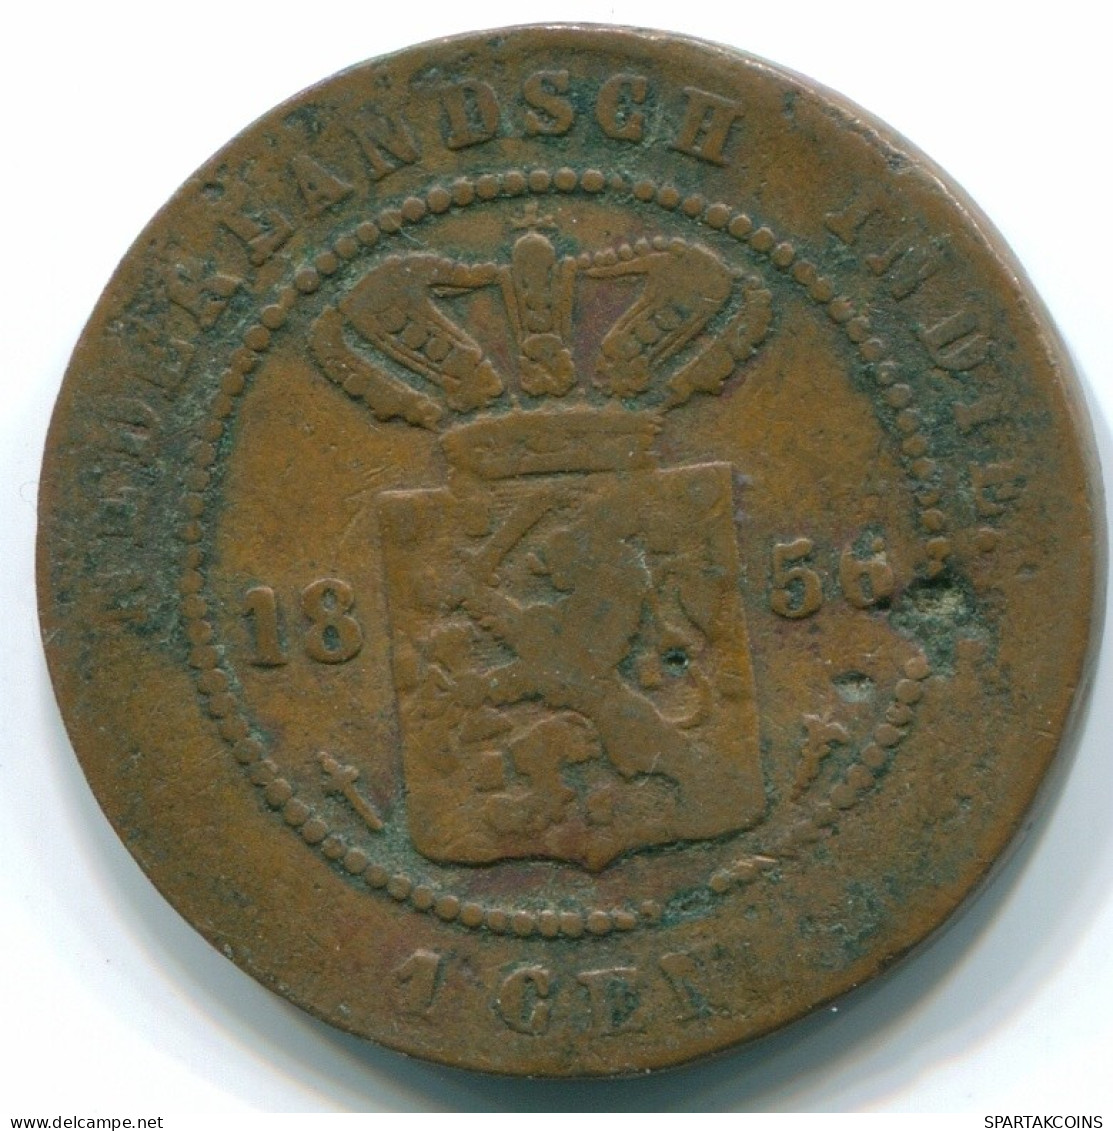 1 CENT 1856 NETHERLANDS EAST INDIES INDONESIA Copper Colonial Coin #S10017.U.A - Indes Néerlandaises